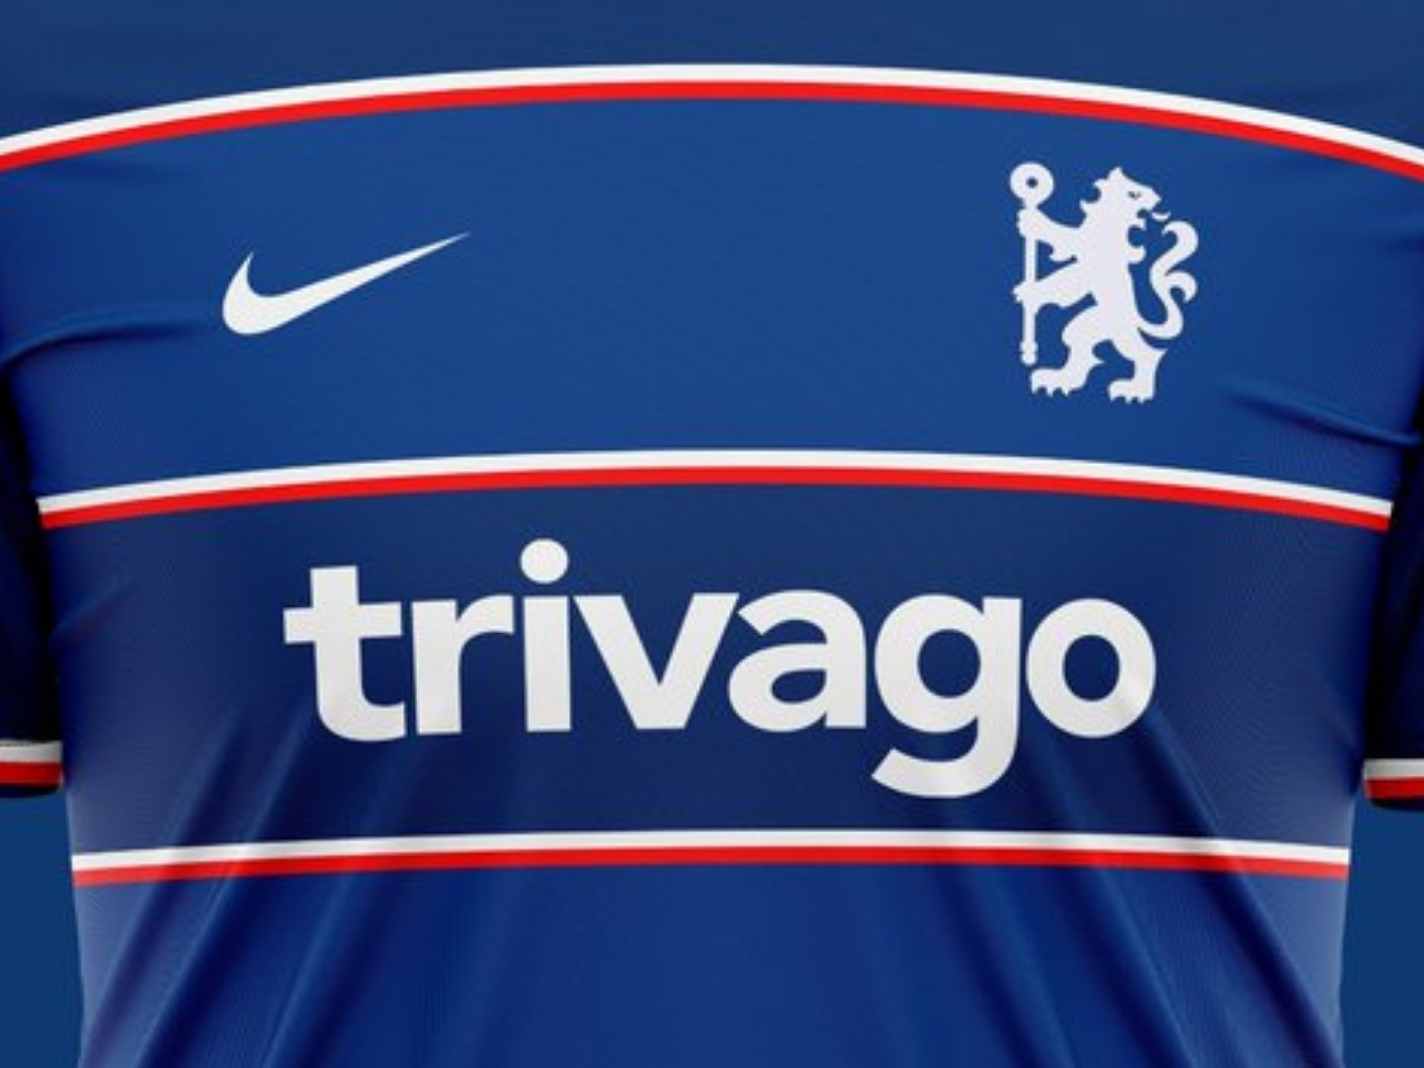 There's a stunning Chelsea concept kit inspired by 8485 home kit doing the rounds online